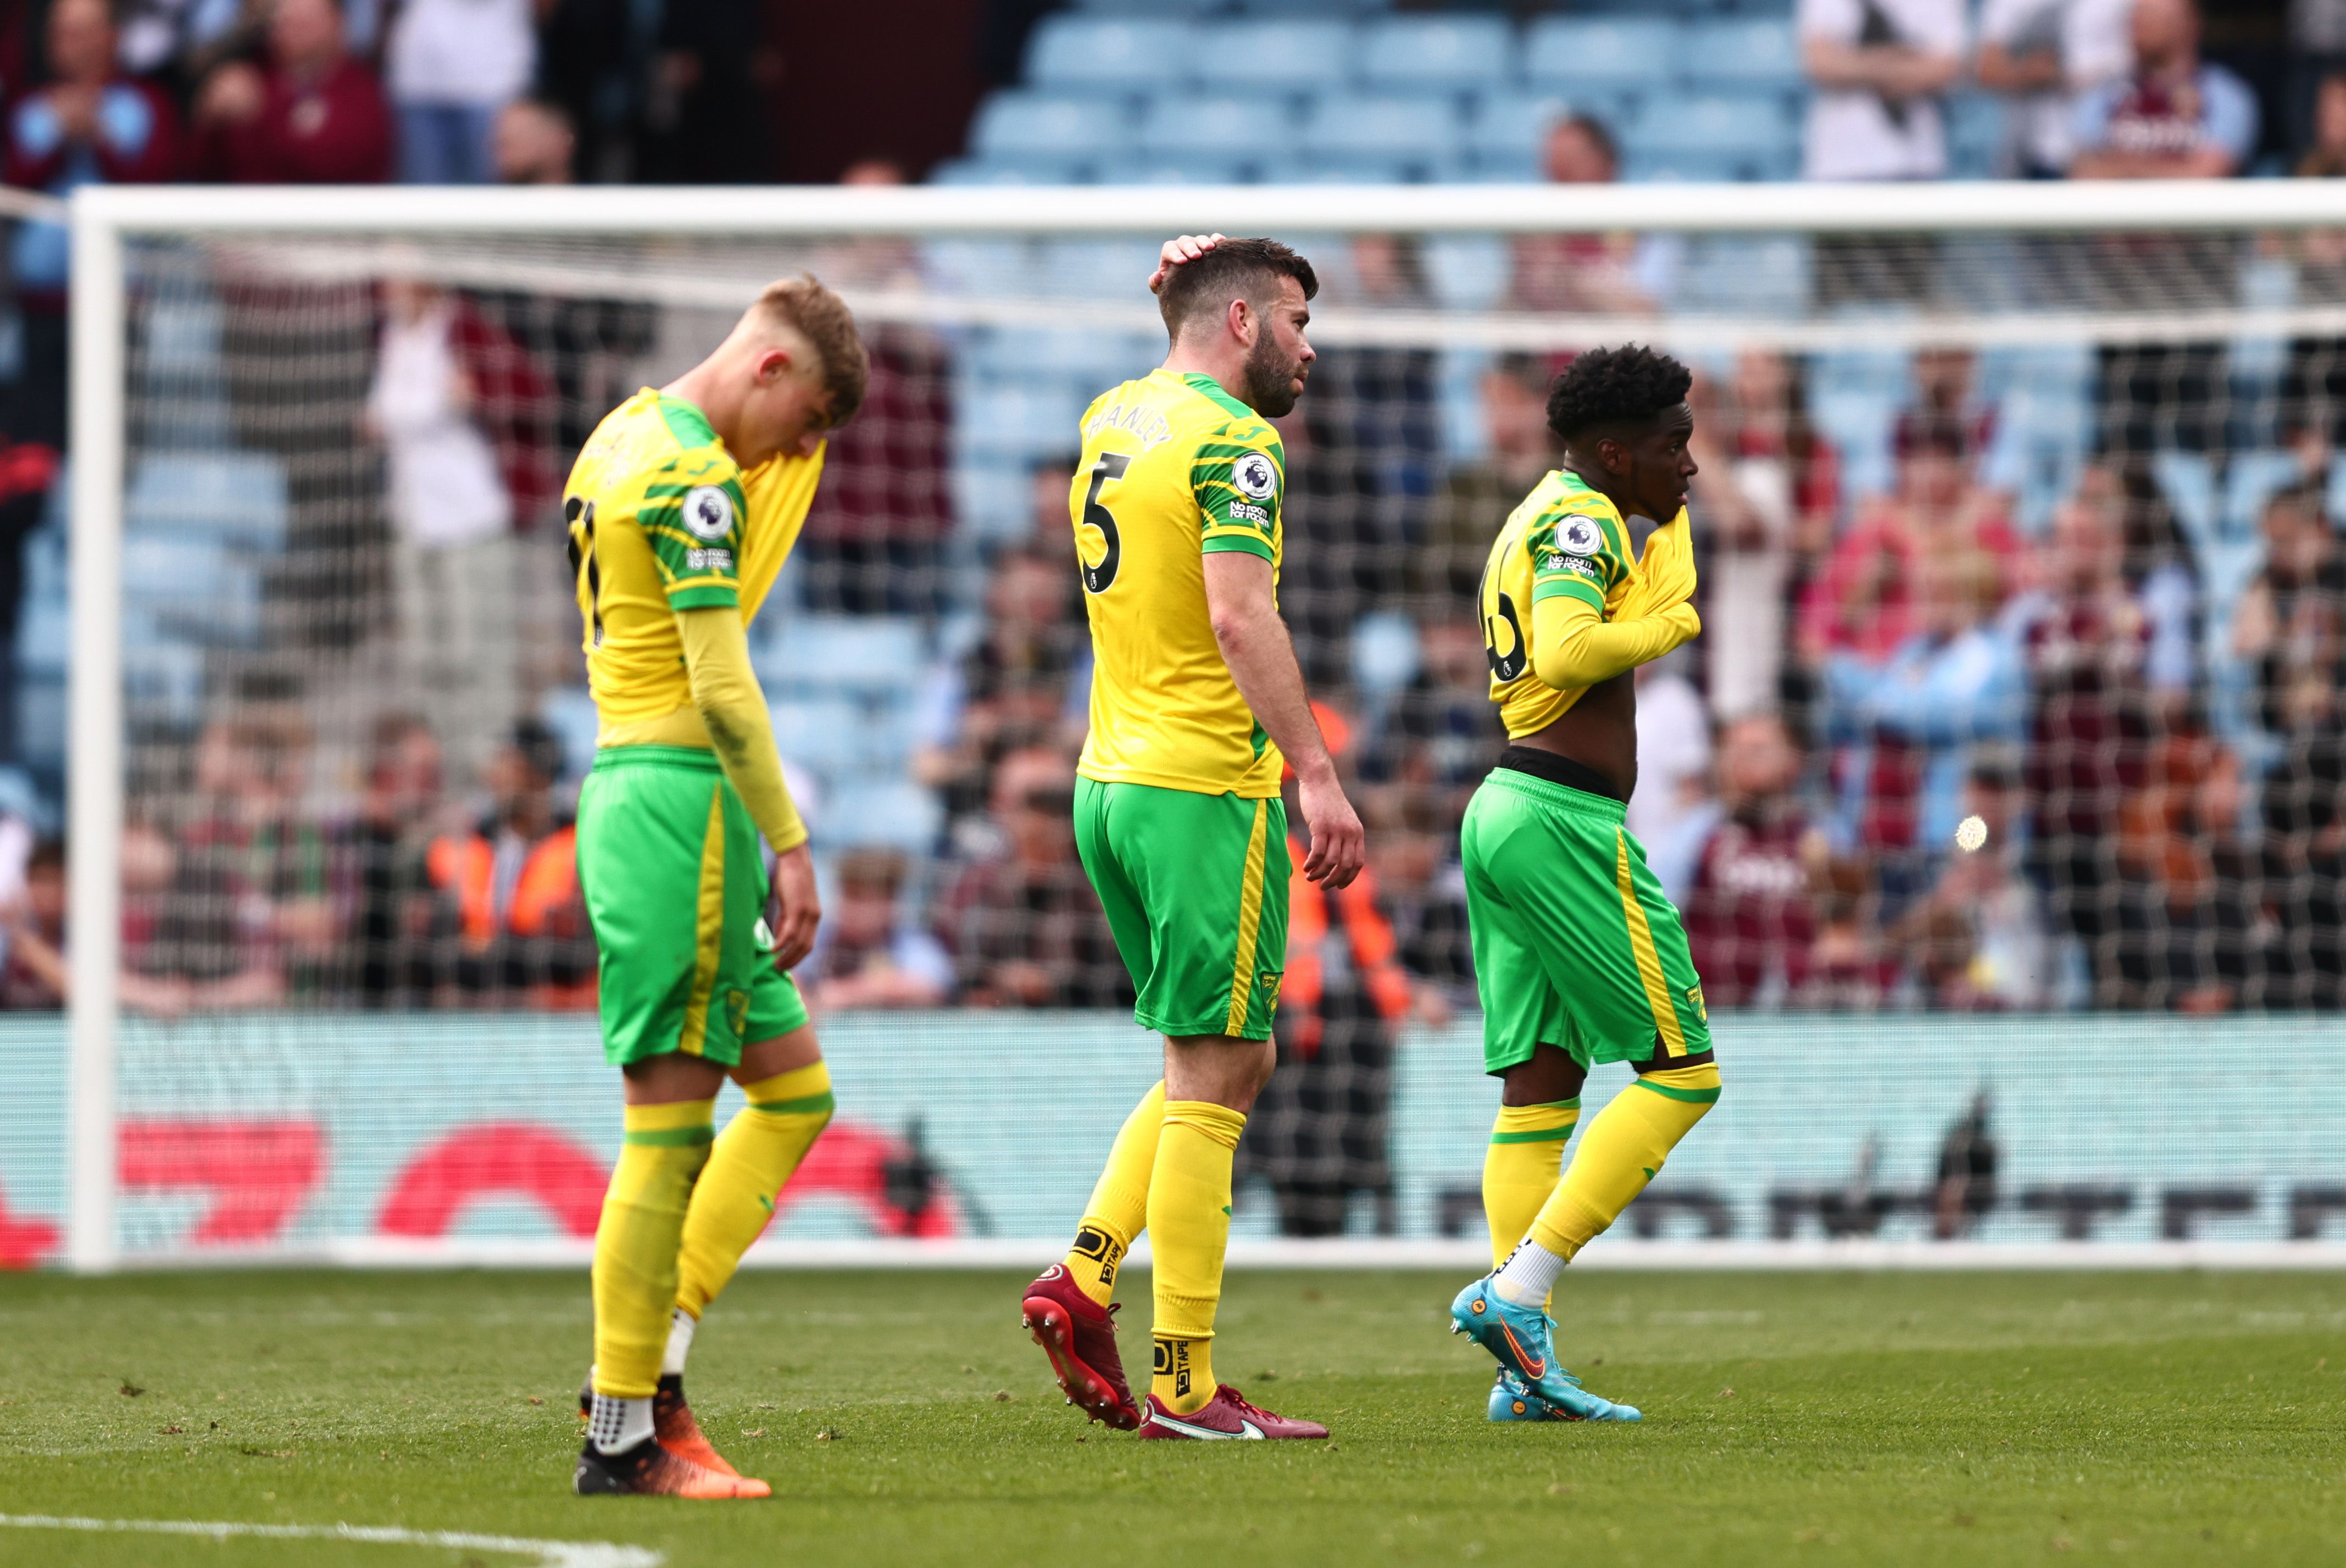 Relegated Norwich will receive around £2.2m in merit payments